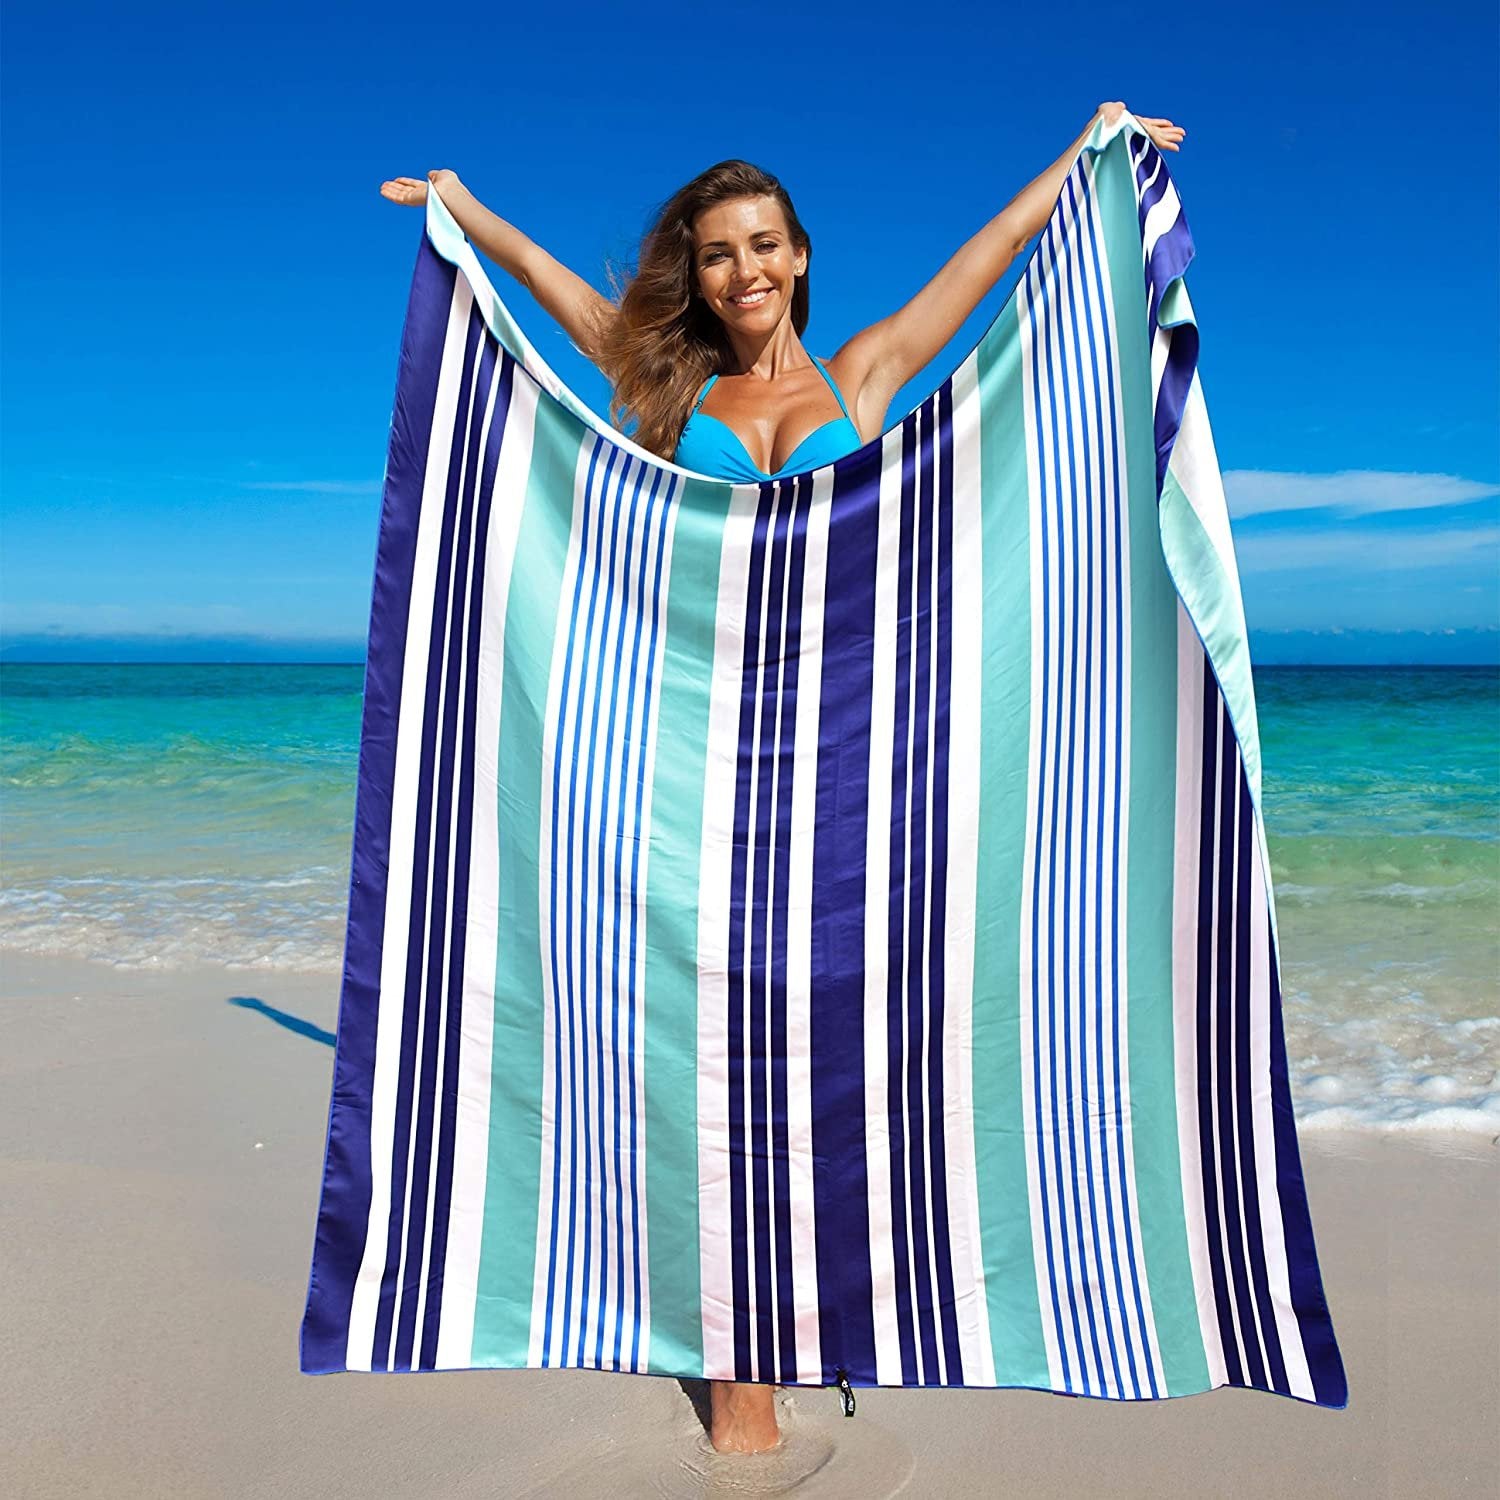 Elite Trend Beach Travel Towel Oversized Camping - XL 78 x 35 inch Lightweight Quick Dry Sand Free Extra Large Towels & Blanket - Perfect for Swim